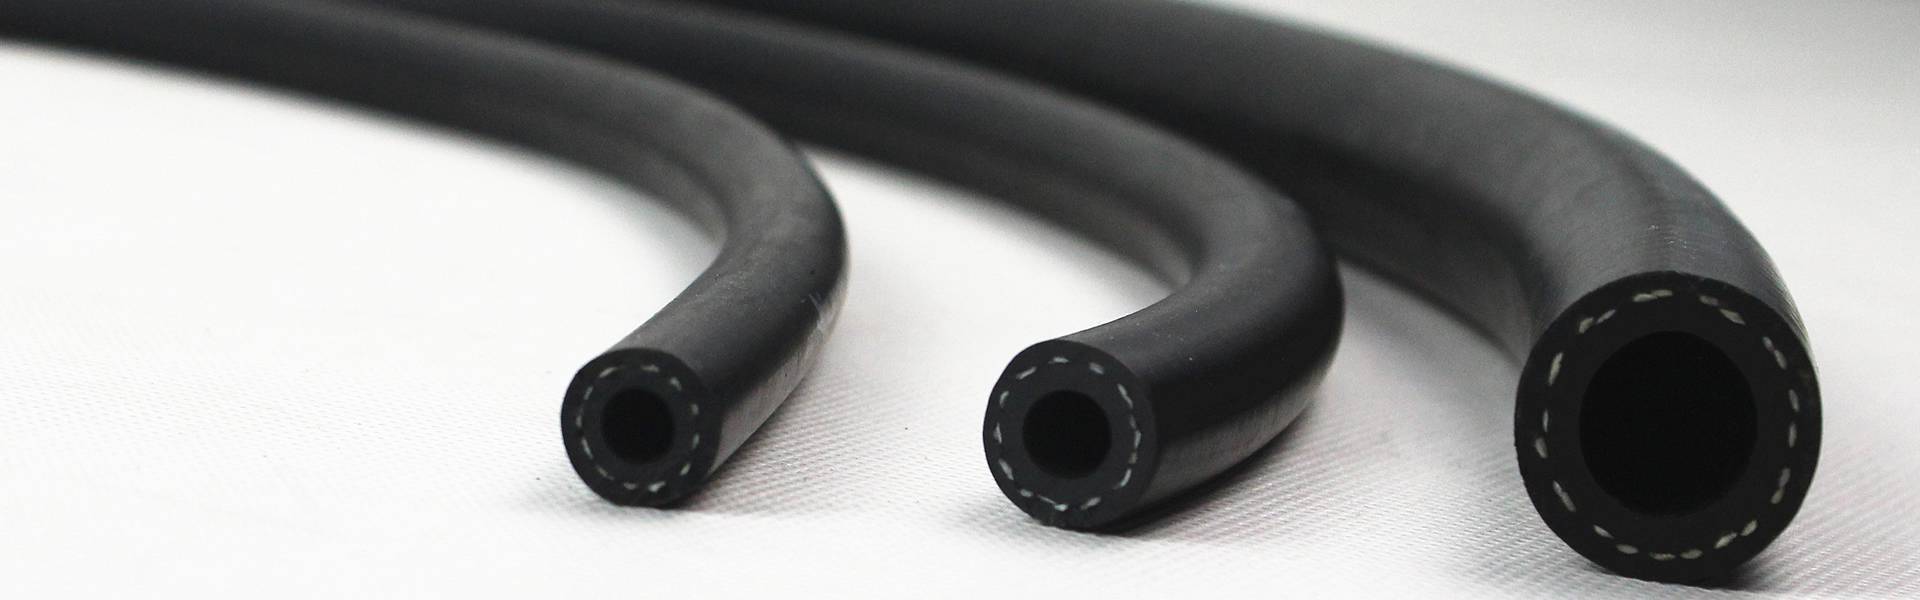 Transmission oil cooler hose features high working pressure